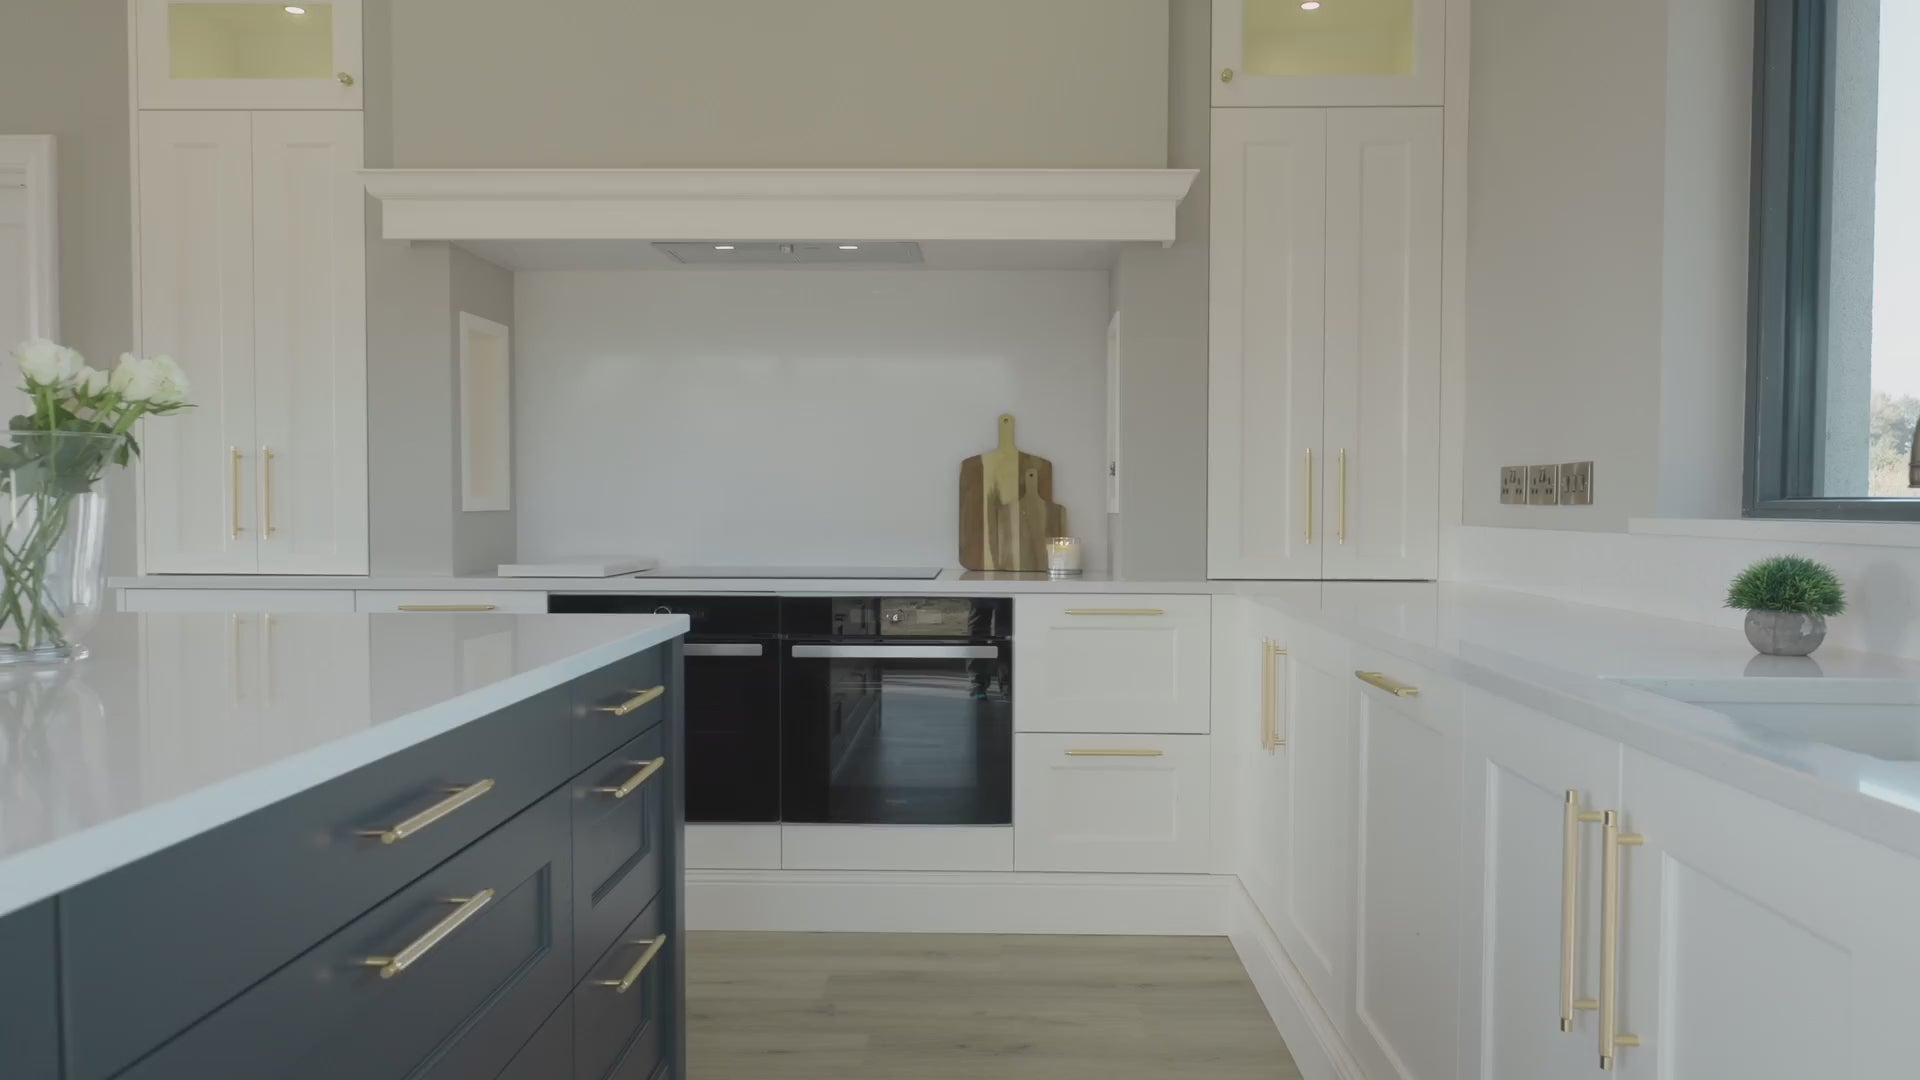 Load video: Video showing close up images of Gold handles on off white and navy cabinetry in a newly completed kitchen